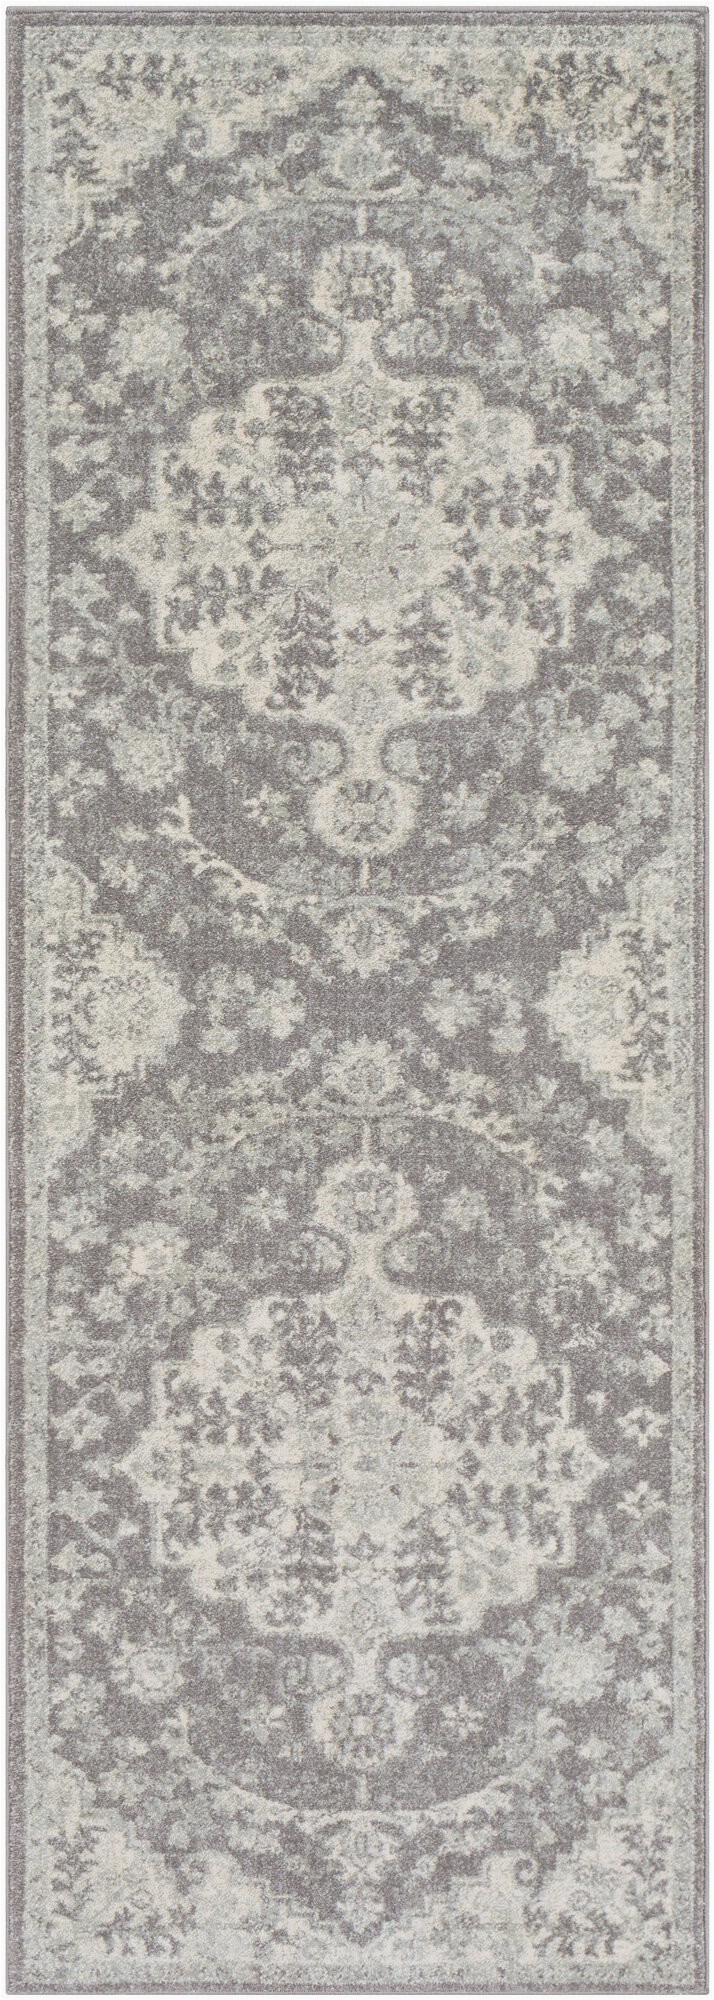 Hillsby Gray Beige area Rug Hillsby oriental Light Gray Charcoal area Rug